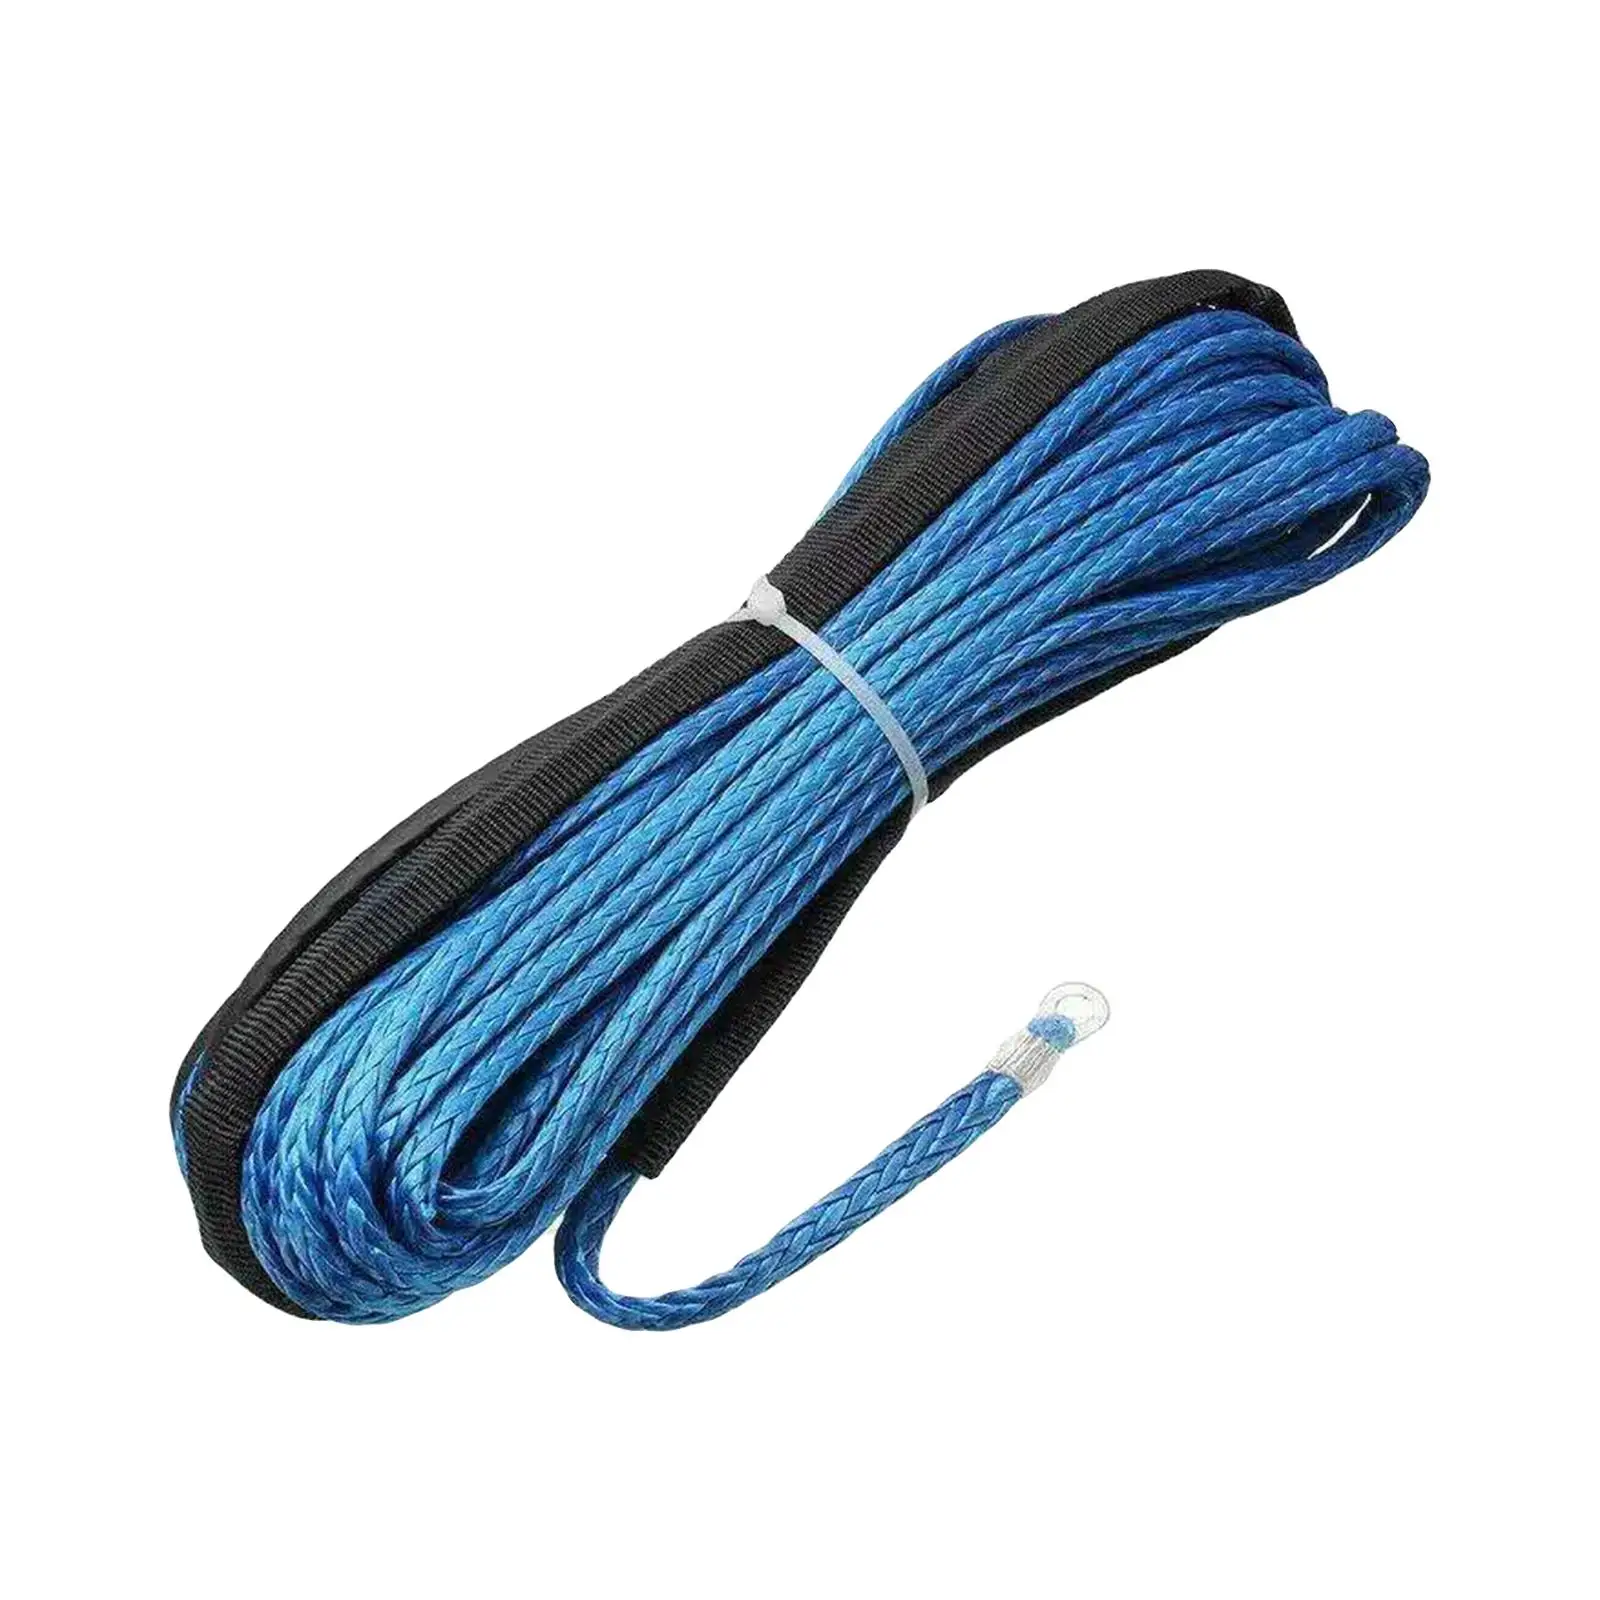 Synthetic Winch Rope 50` Universal Road  Rope  Vehicles Towing durable four.8mm Towing Winch Cable Cars UTV RV Boat Truck